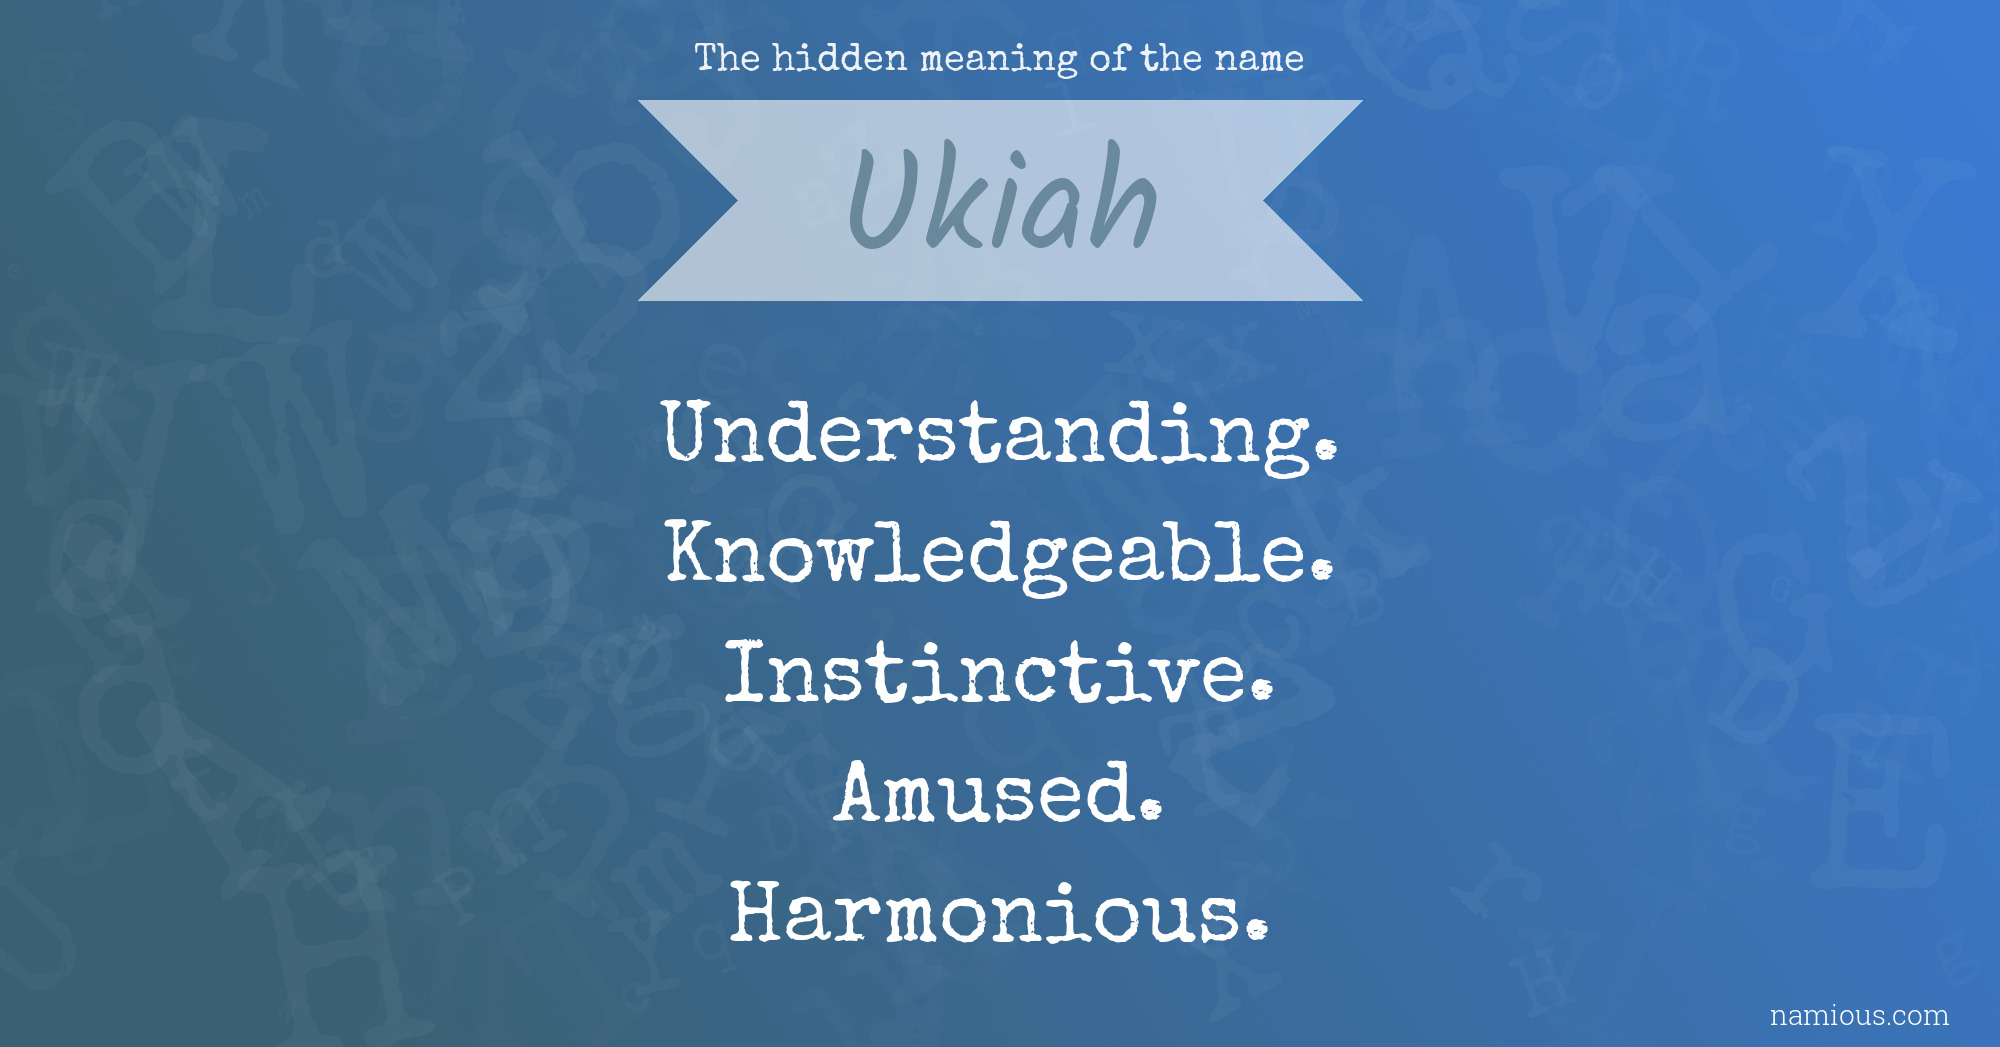 The hidden meaning of the name Ukiah